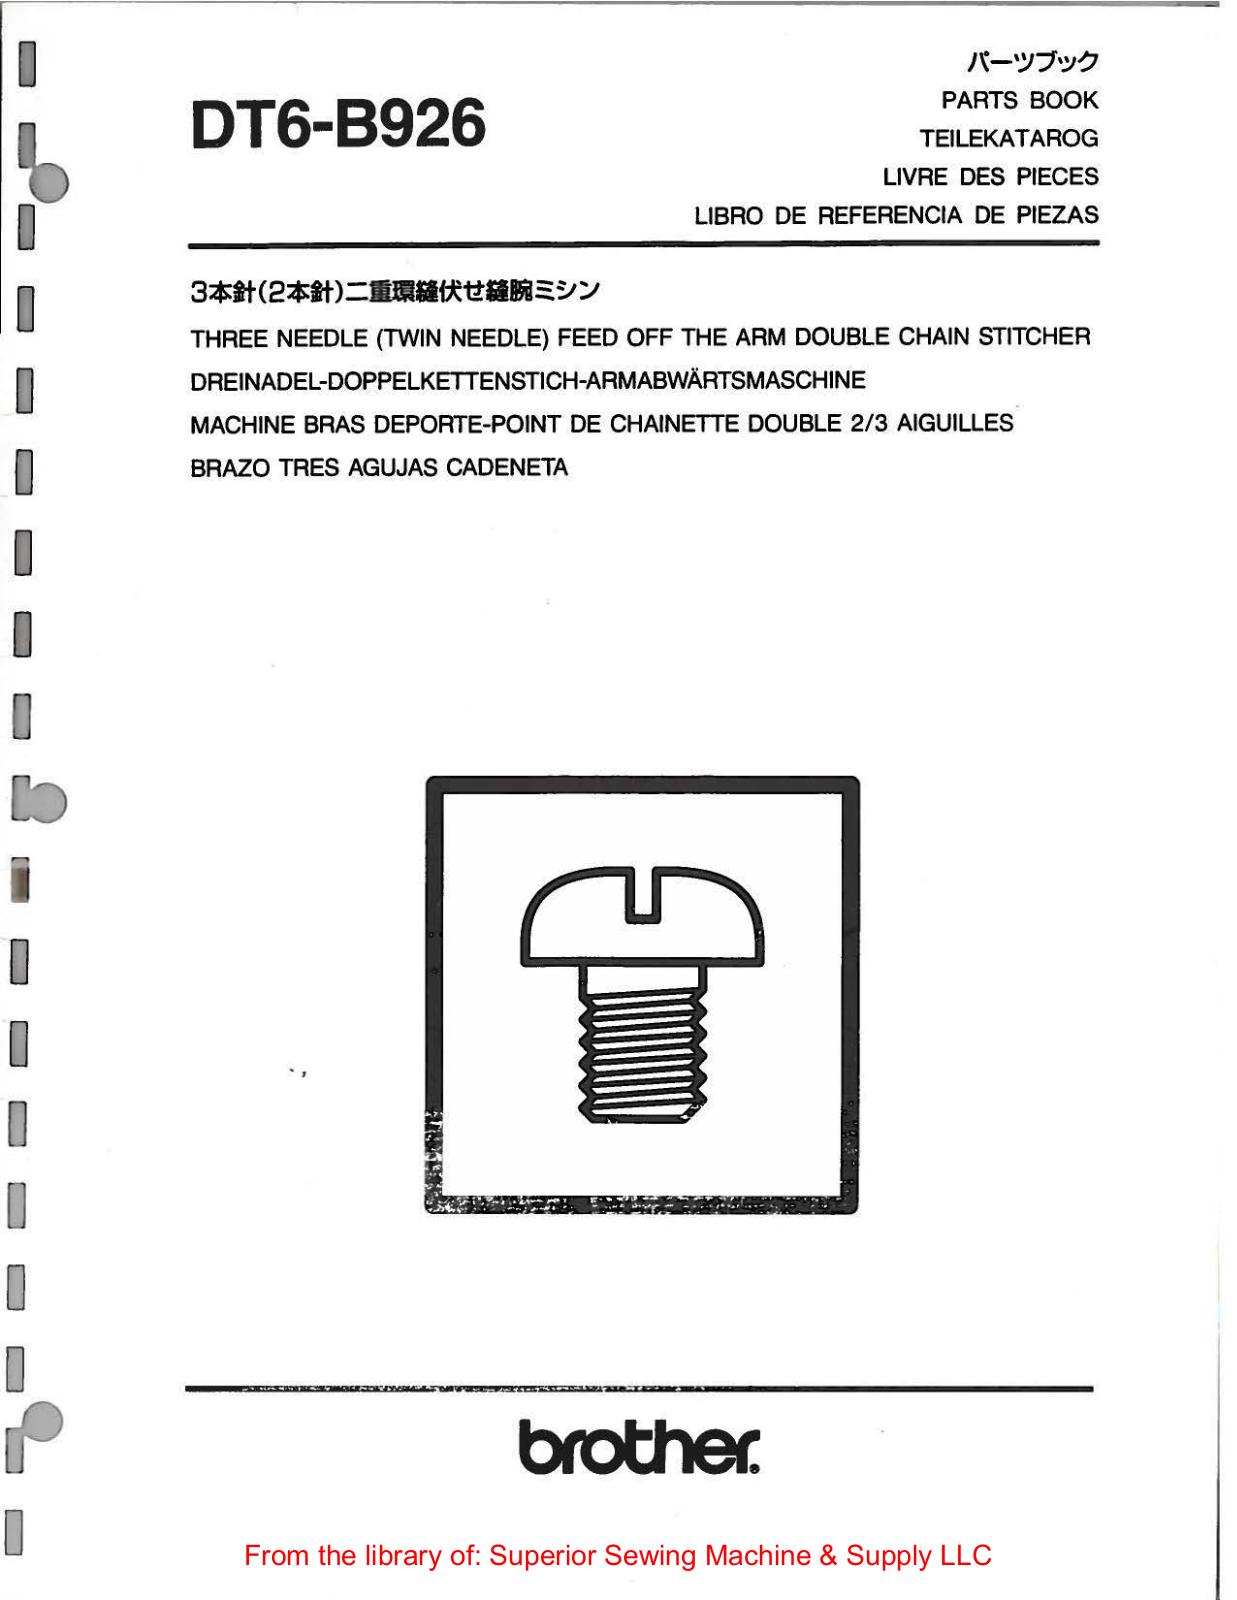 Brother DT6-B926 Manual